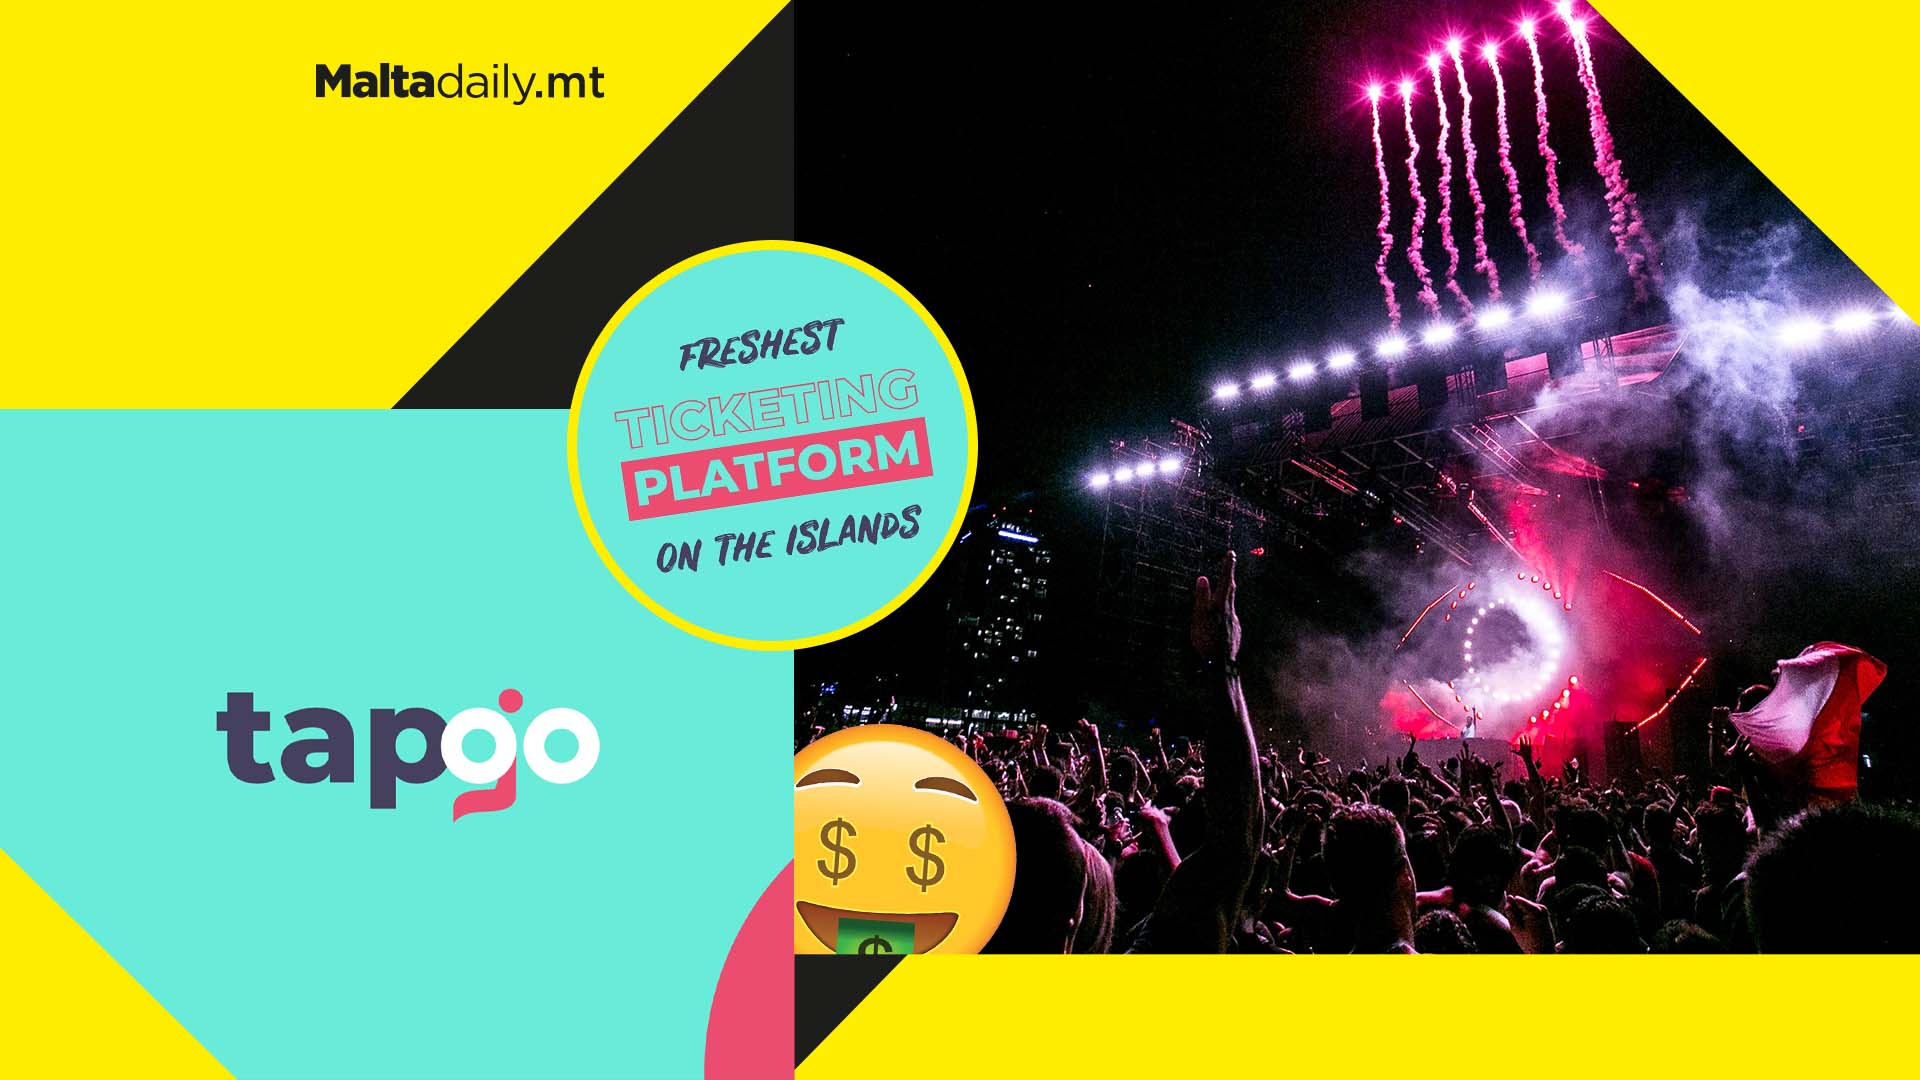 Local platform tapgo pledges to usher in 'a new era of events' with the best ticket rates in Malta